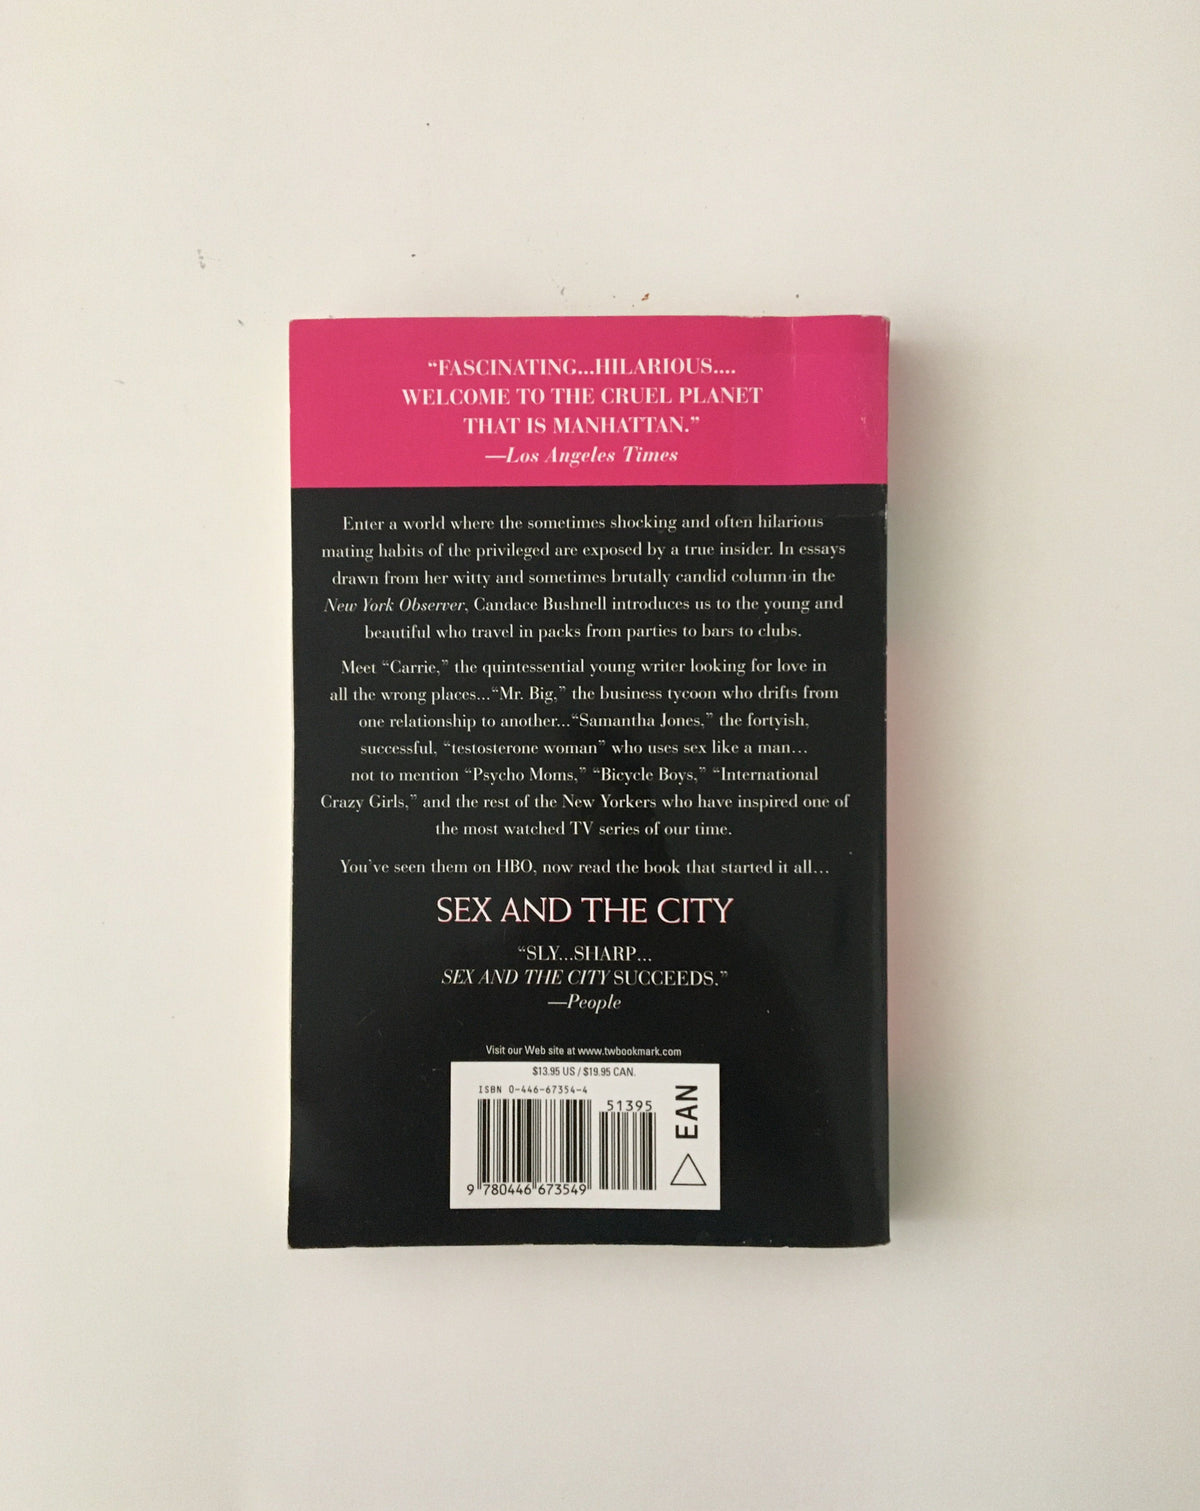 Sex and the City by Candice Bushnell